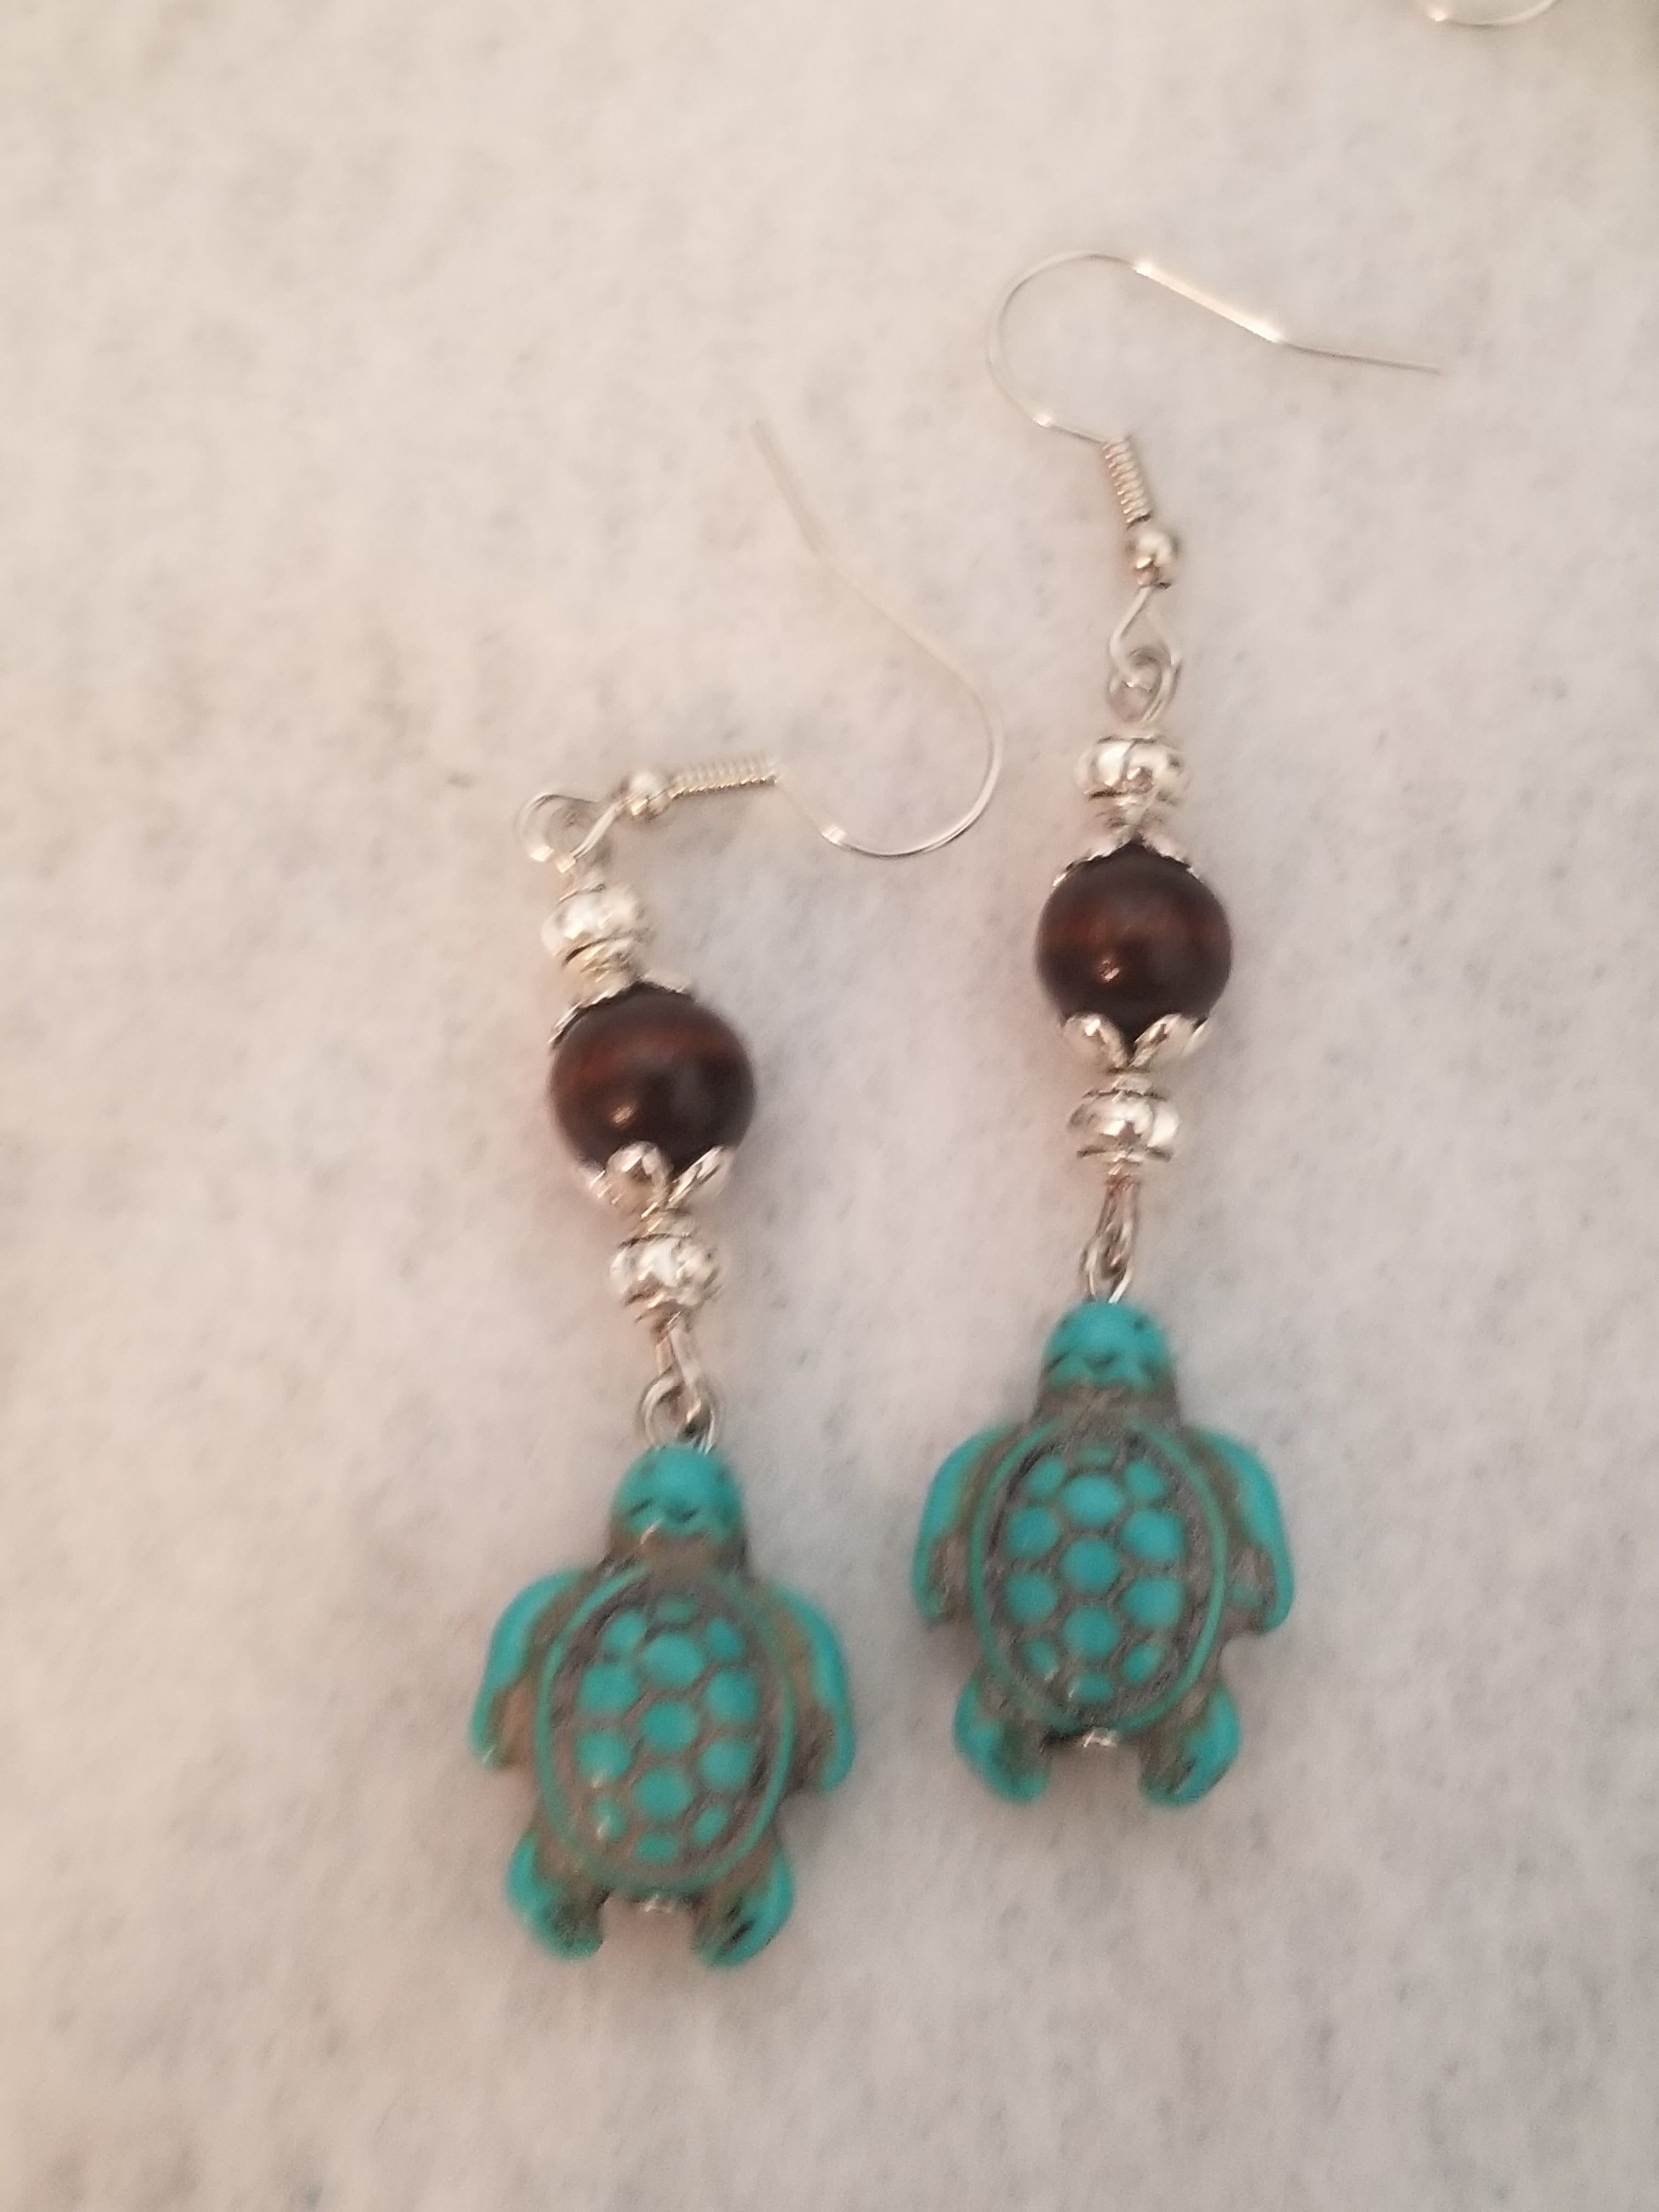 Turquois Colored #71 Earrings